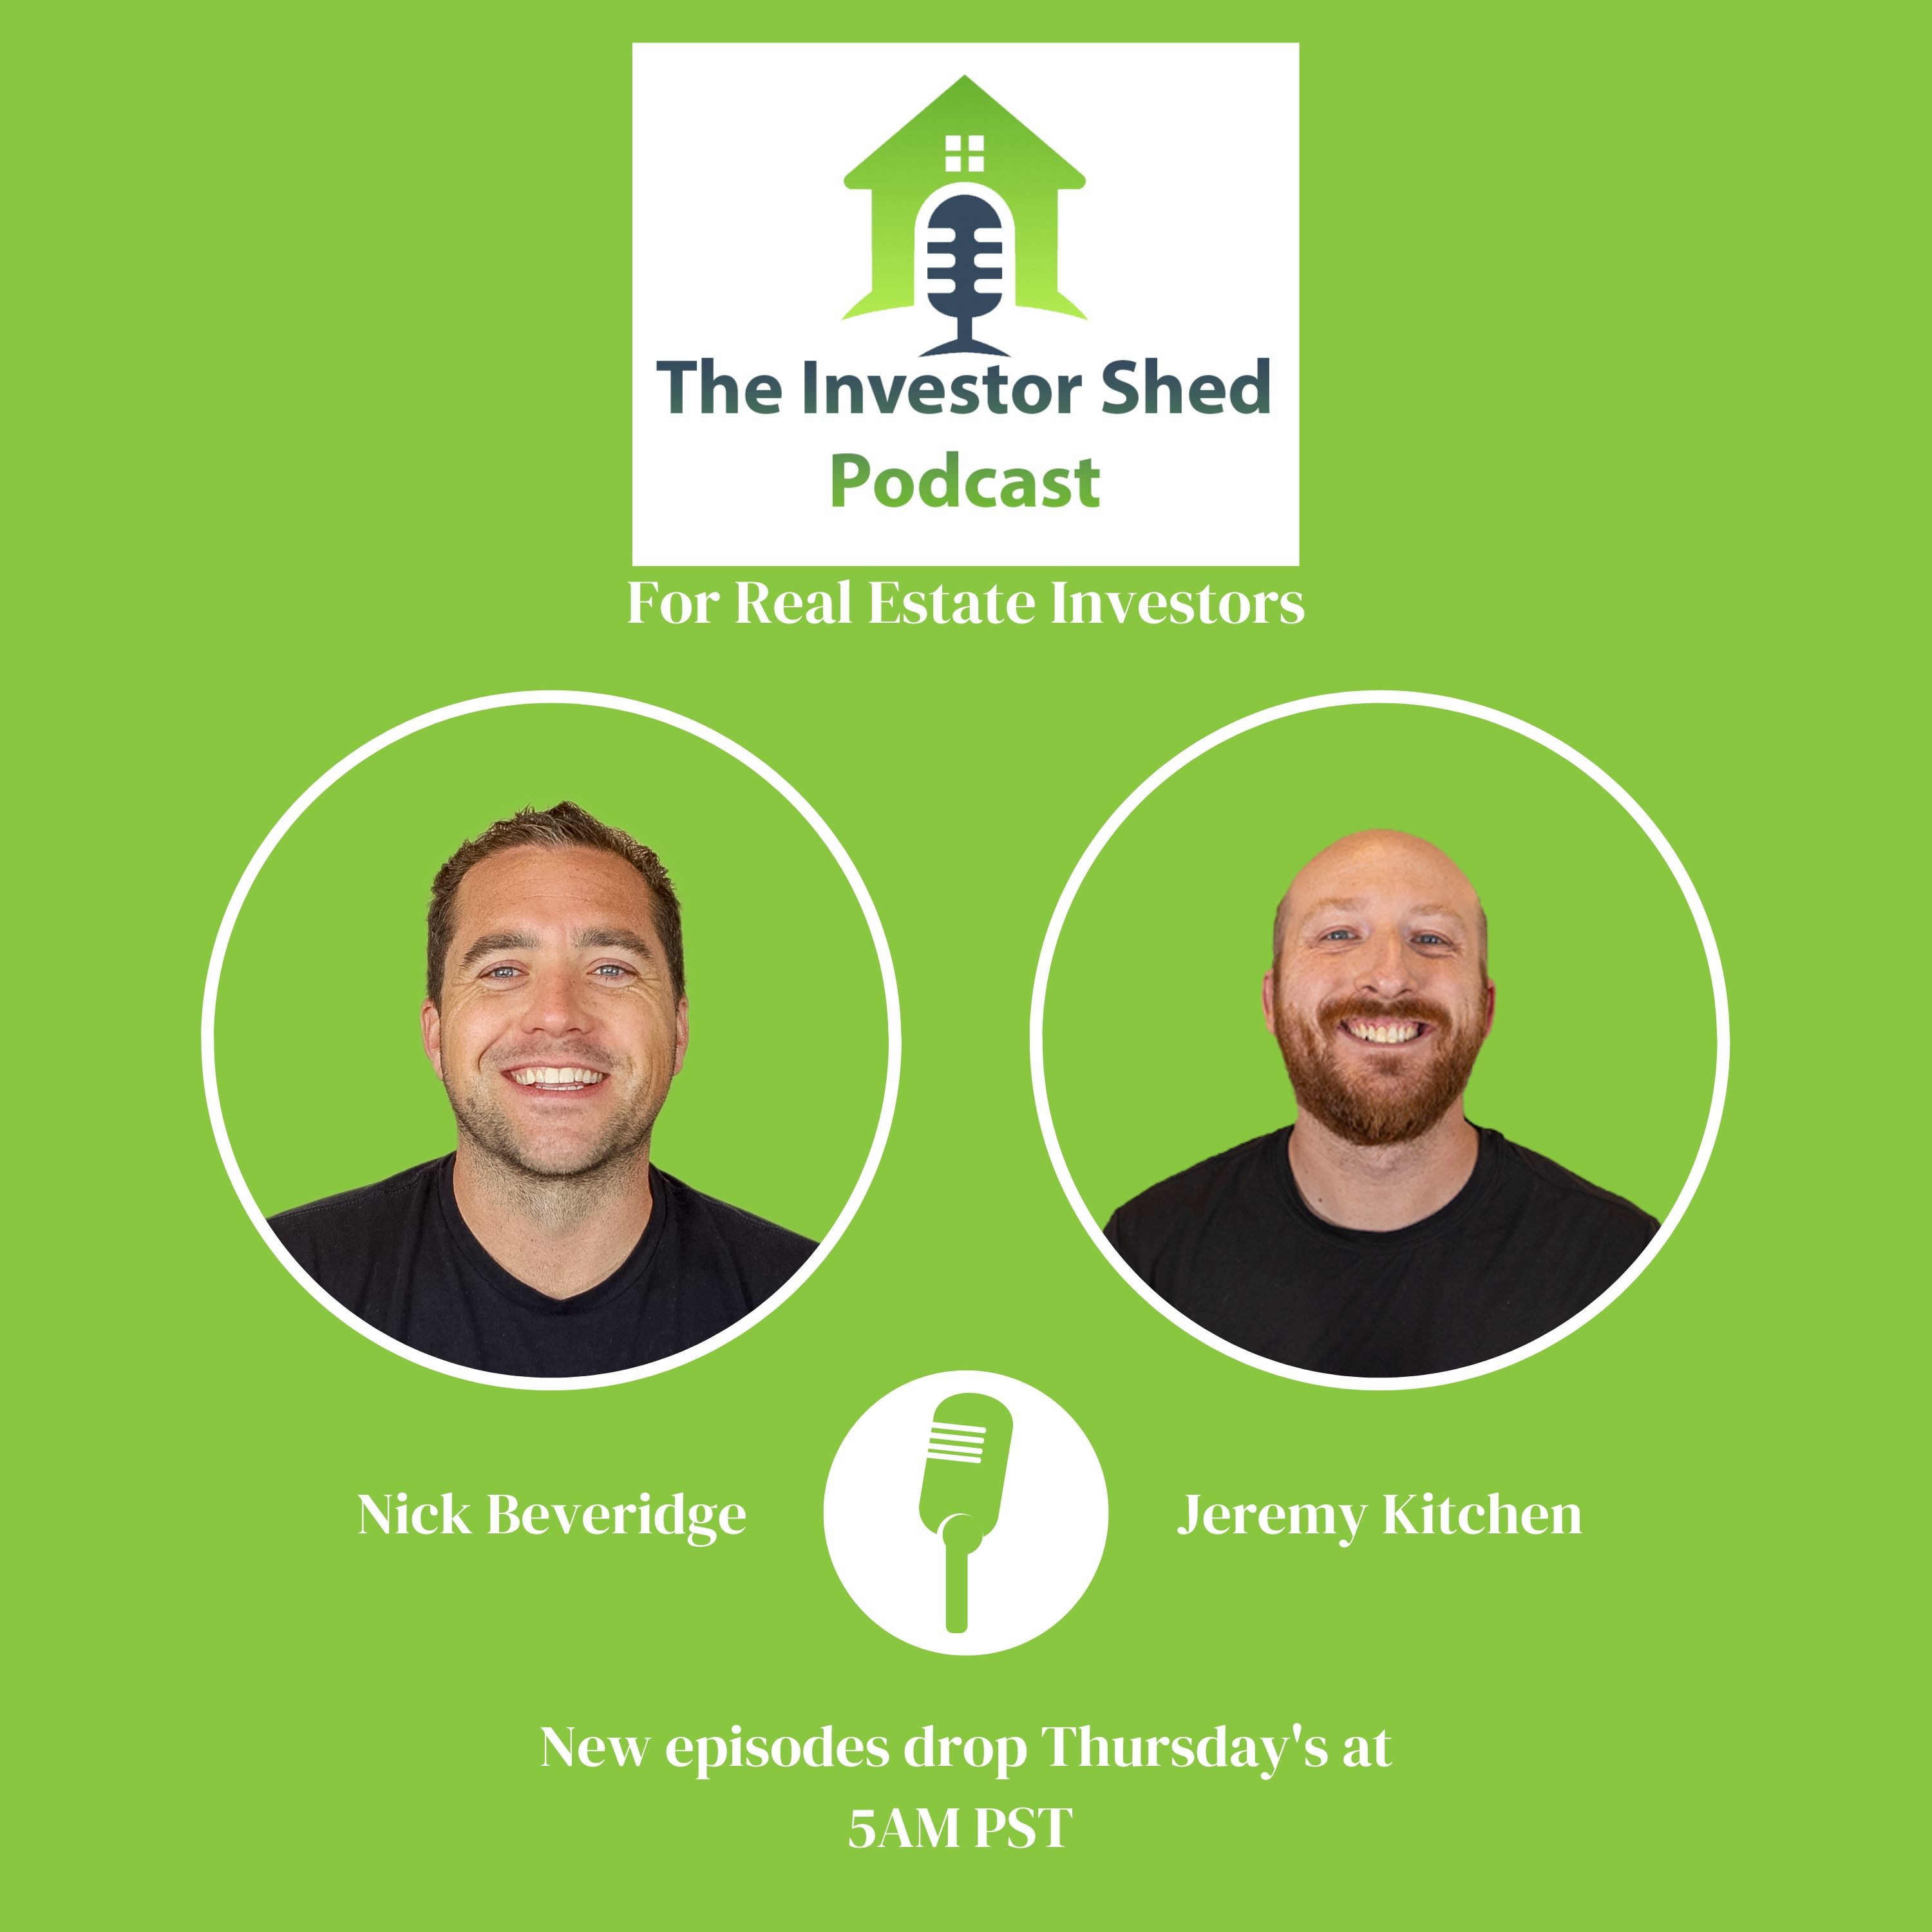 The Investor Shed Podcast